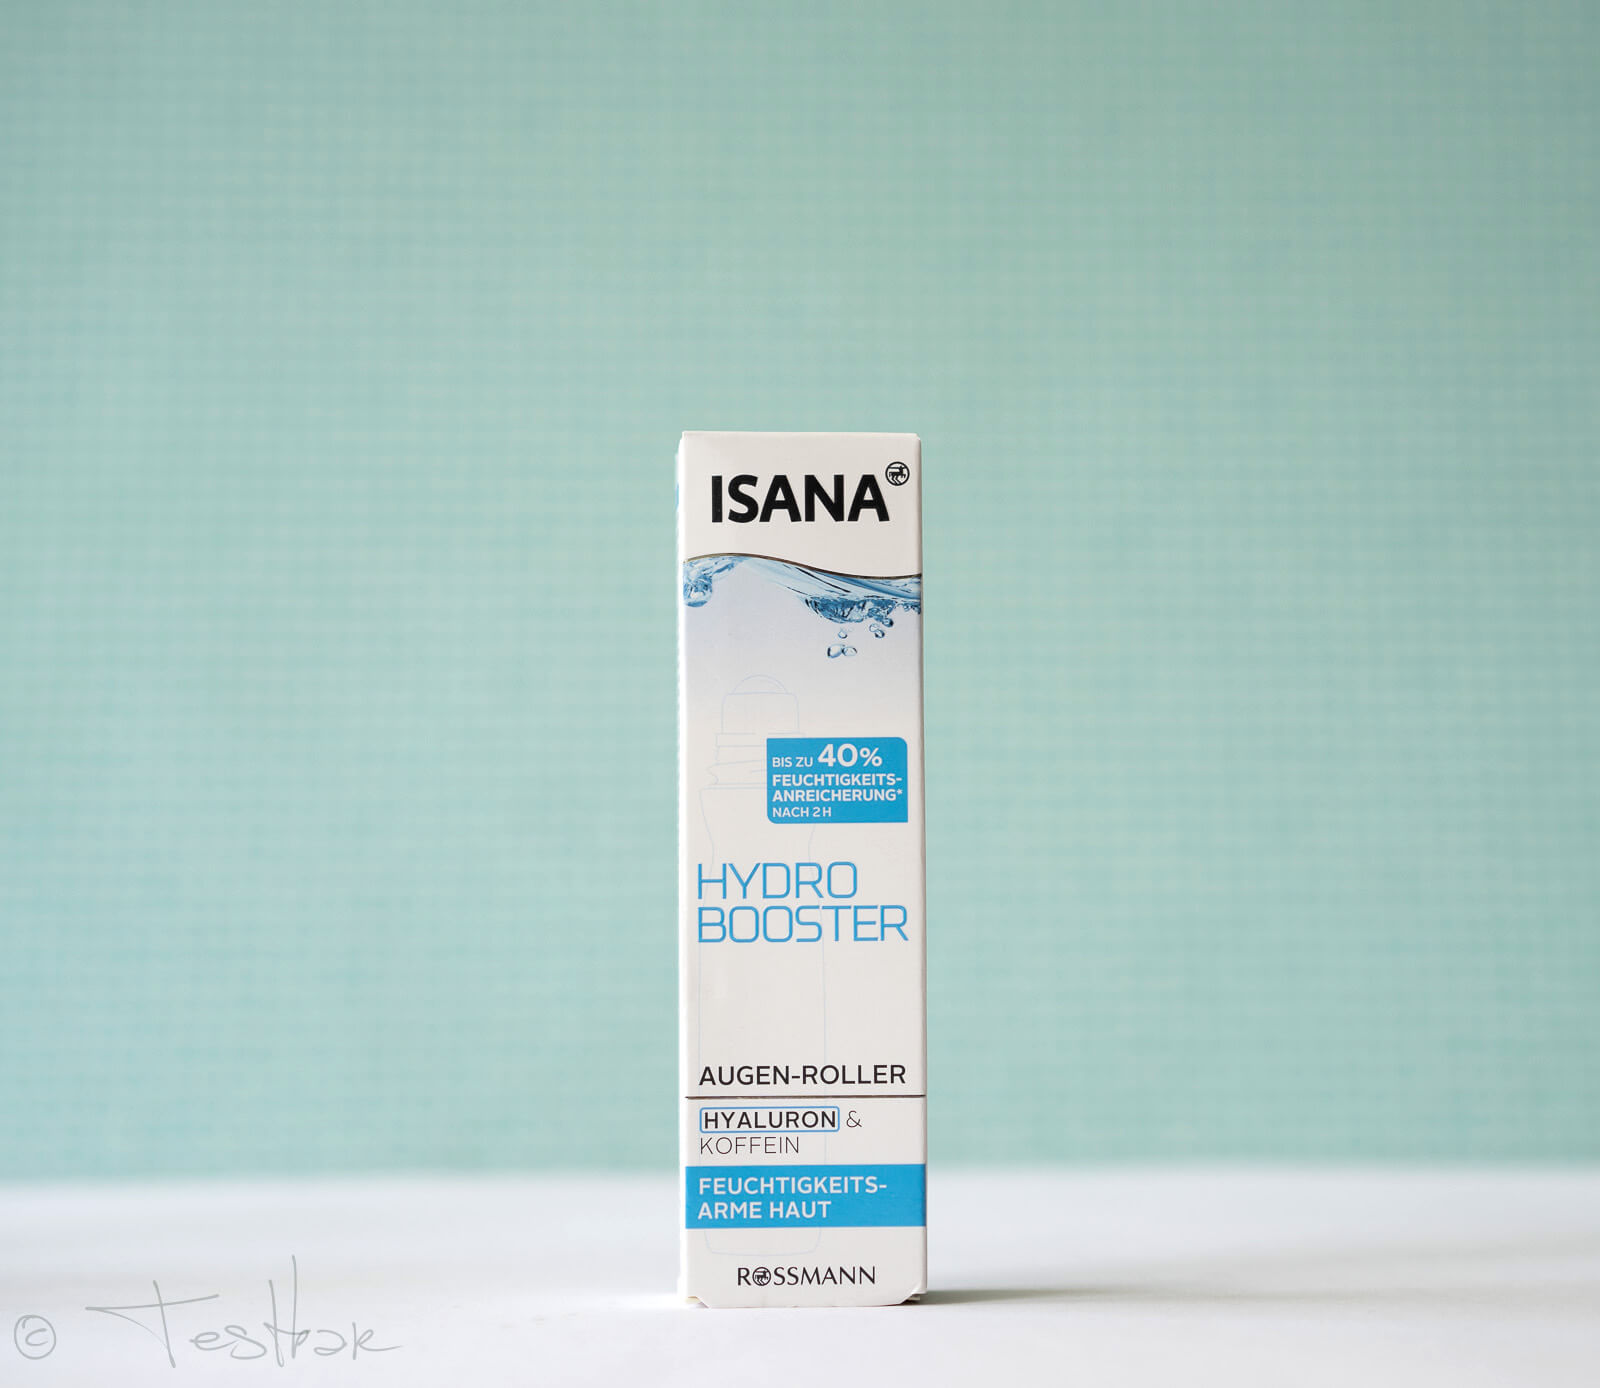 ISANA - Hydro Booster Augen-Roller